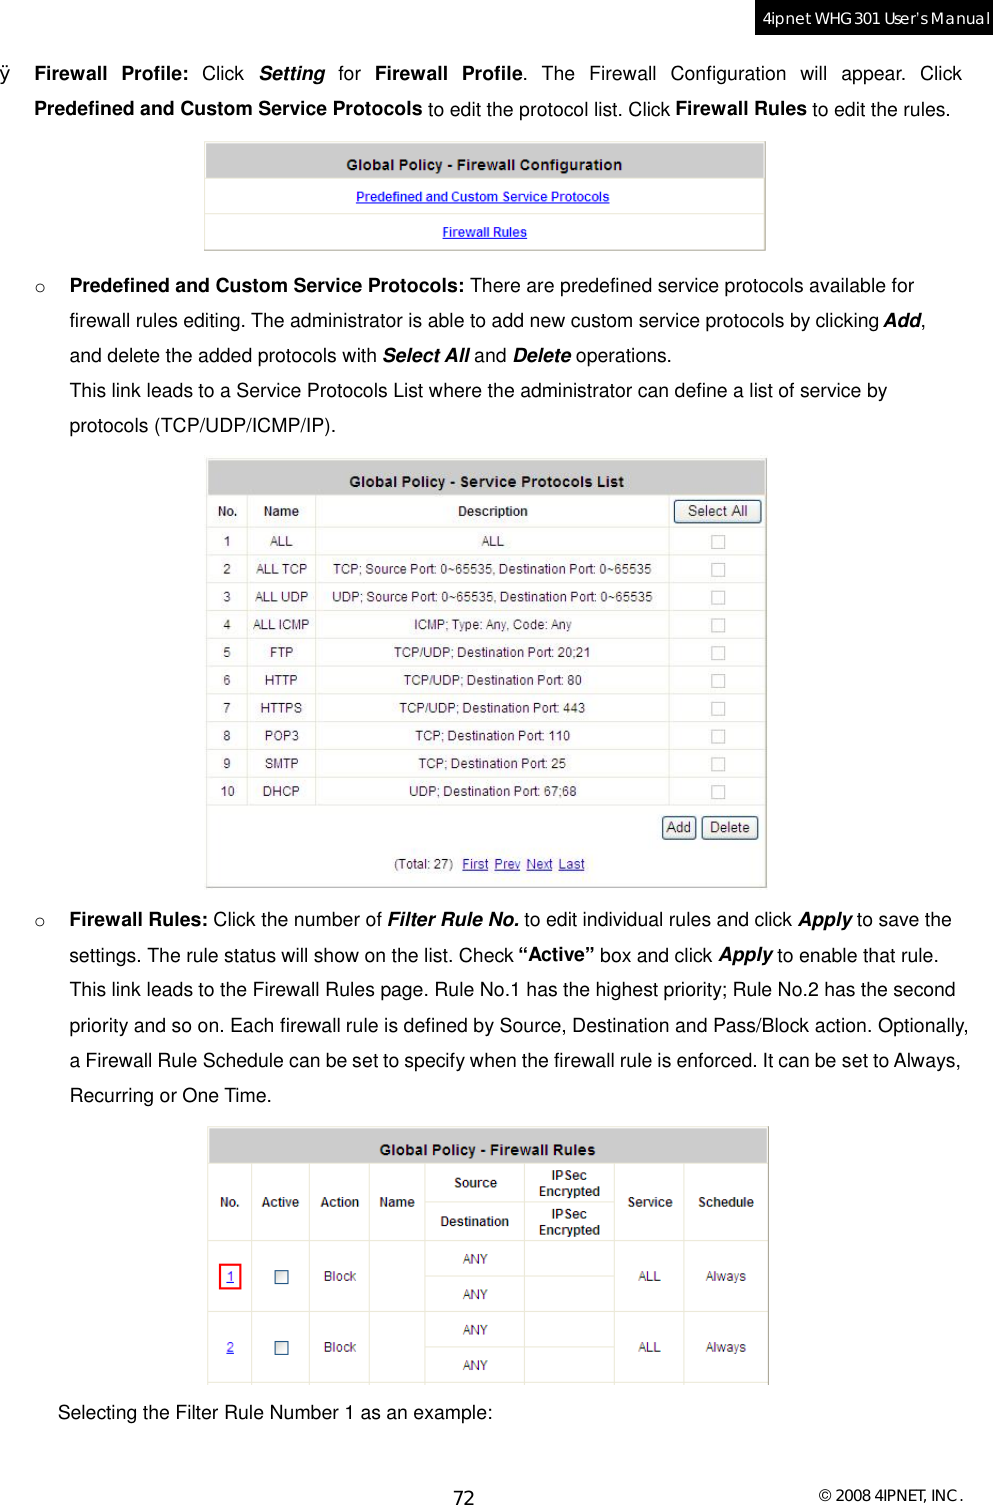  © 2008 4IPNET, INC. 72 4ipnet WHG301 User’s Manual  Ø Firewall Profile:  Click  Setting for  Firewall Profile. The Firewall Configuration will appear. Click Predefined and Custom Service Protocols to edit the protocol list. Click Firewall Rules to edit the rules.  o  Predefined and Custom Service Protocols: There are predefined service protocols available for firewall rules editing. The administrator is able to add new custom service protocols by clicking Add, and delete the added protocols with Select All and Delete operations. This link leads to a Service Protocols List where the administrator can define a list of service by protocols (TCP/UDP/ICMP/IP).   o  Firewall Rules: Click the number of Filter Rule No. to edit individual rules and click Apply to save the settings. The rule status will show on the list. Check “Active” box and click Apply to enable that rule.  This link leads to the Firewall Rules page. Rule No.1 has the highest priority; Rule No.2 has the second priority and so on. Each firewall rule is defined by Source, Destination and Pass/Block action. Optionally, a Firewall Rule Schedule can be set to specify when the firewall rule is enforced. It can be set to Always, Recurring or One Time.  Selecting the Filter Rule Number 1 as an example: 